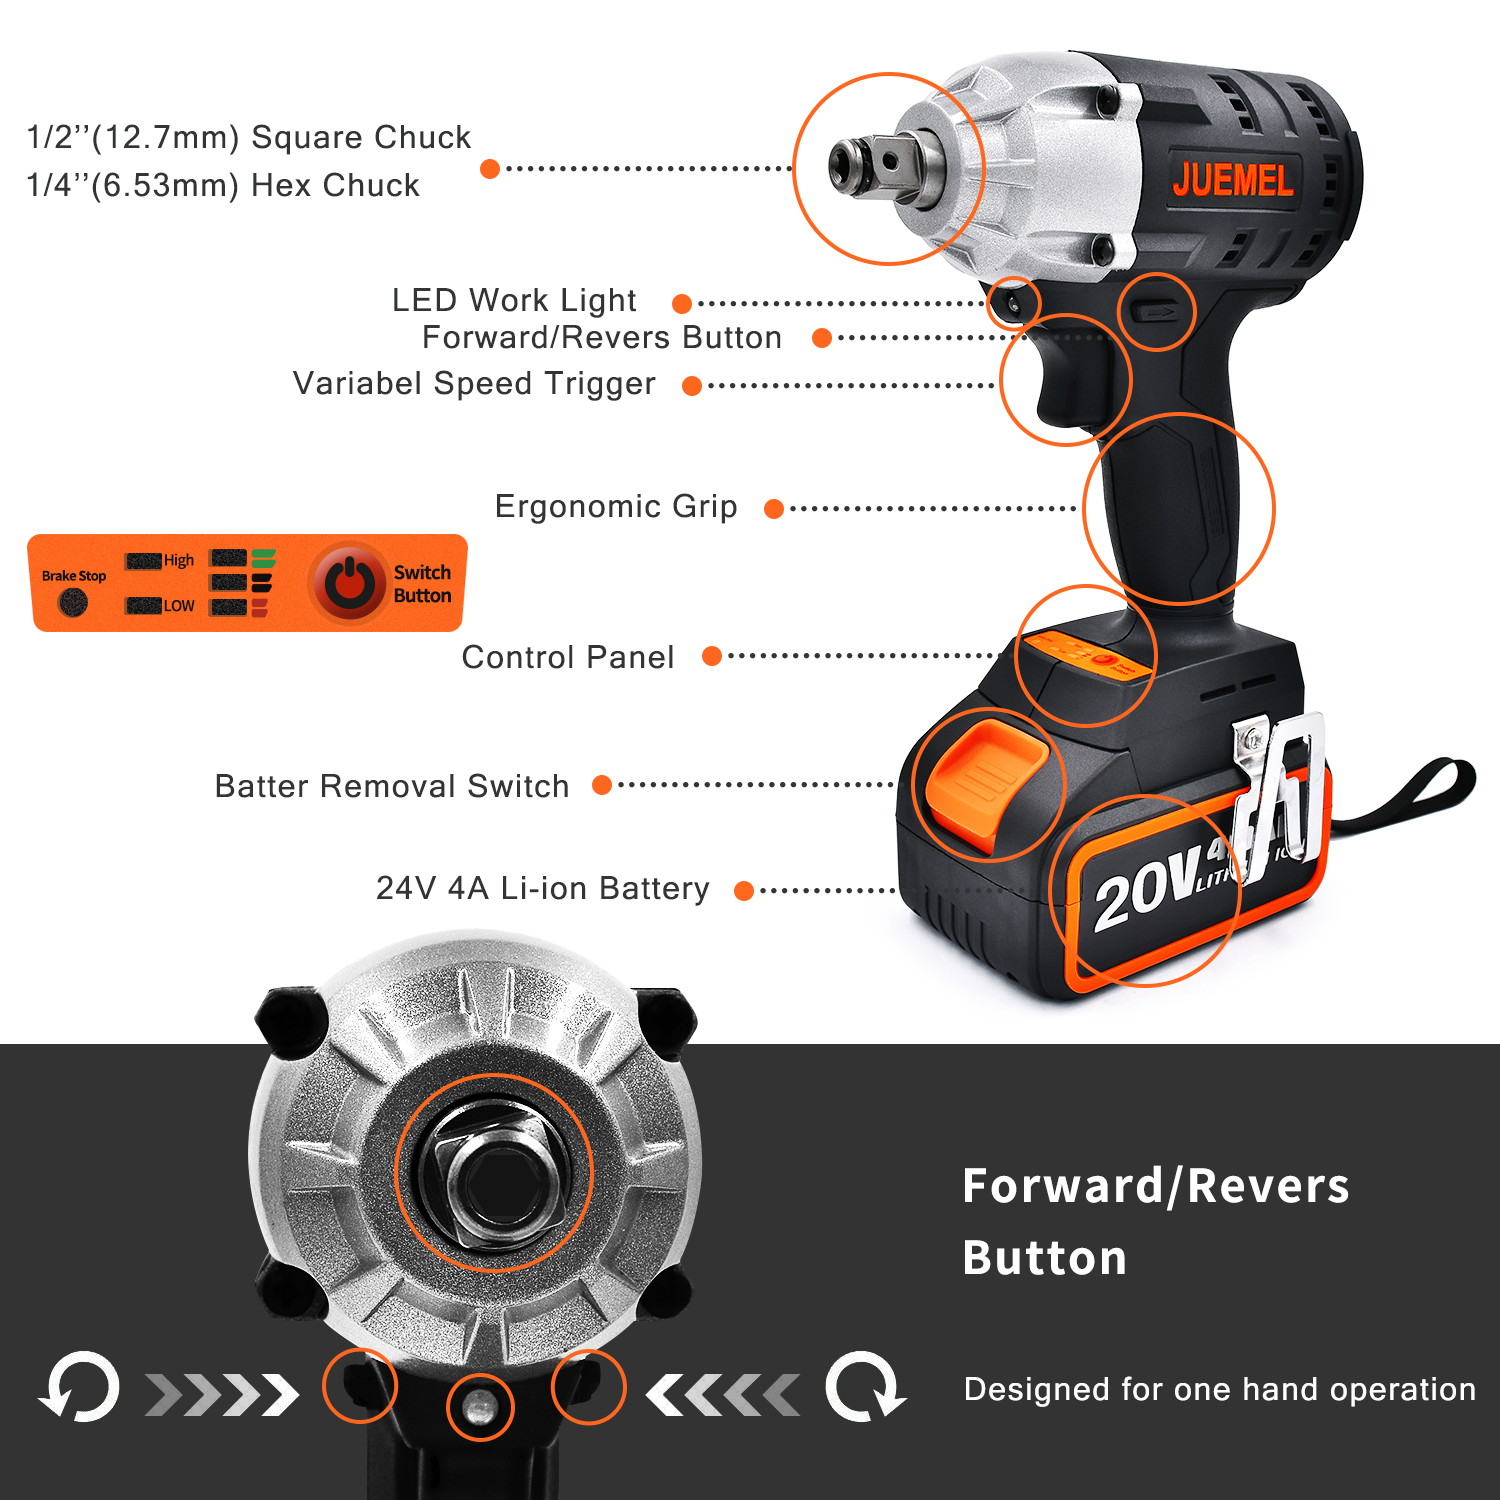 Cordless Impact Wrench, JUEMEL 20V Impact Driver 320N.m Torque, 4.0Ah Lithium Battery, 2-Speed/Brushless / 12.7mm and 6.35mm Chuck with 14 Accessories, Include Fast Charger, Carry Case